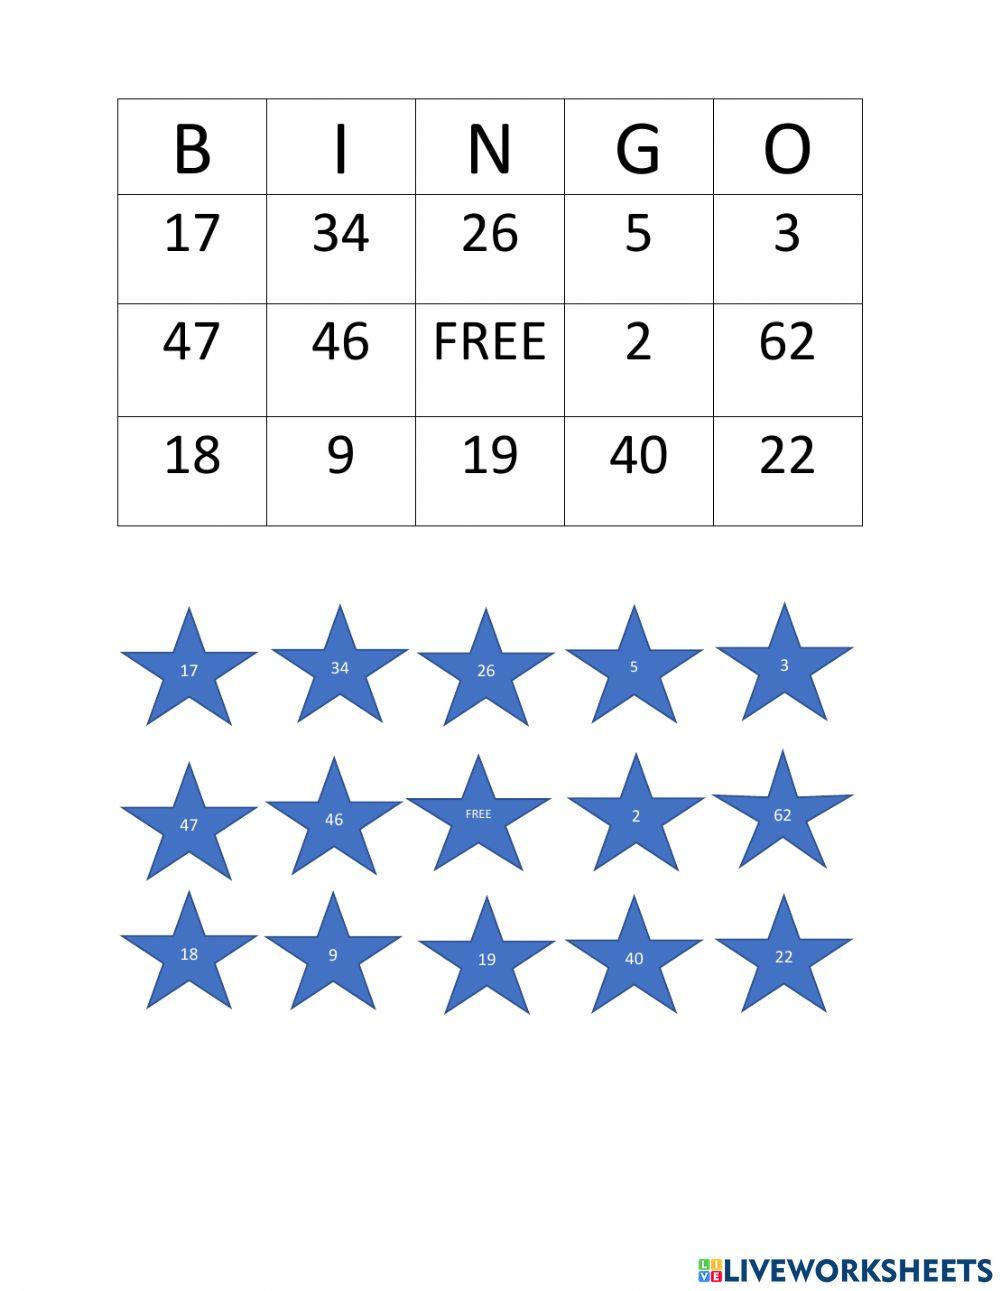 Subtraction with regrouping BINGO Card 3